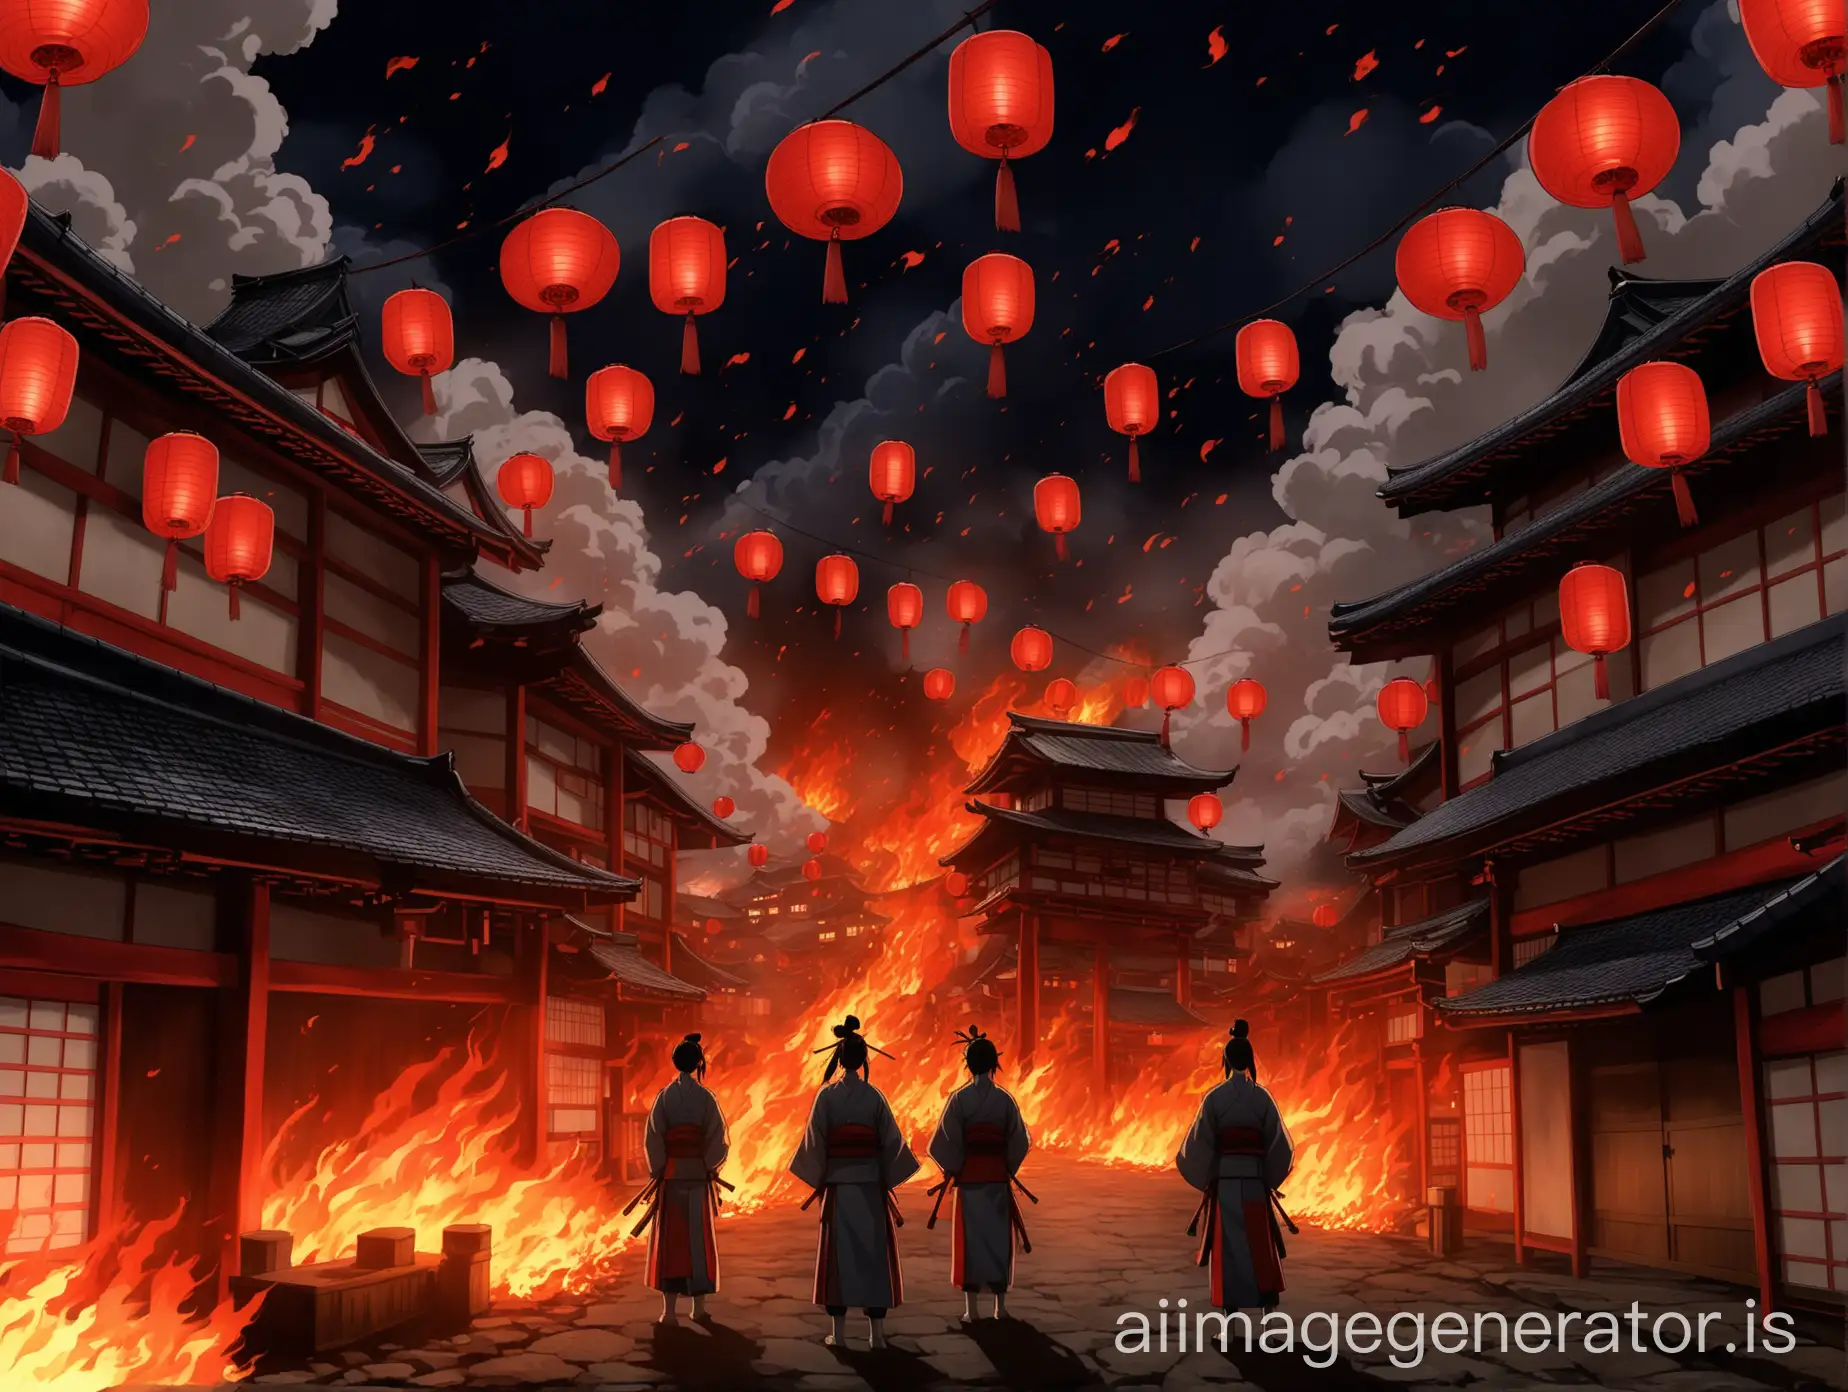 Feudal-Japan-Anime-Scenery-Red-Lanterns-Amidst-Burning-Buildings-at-Night